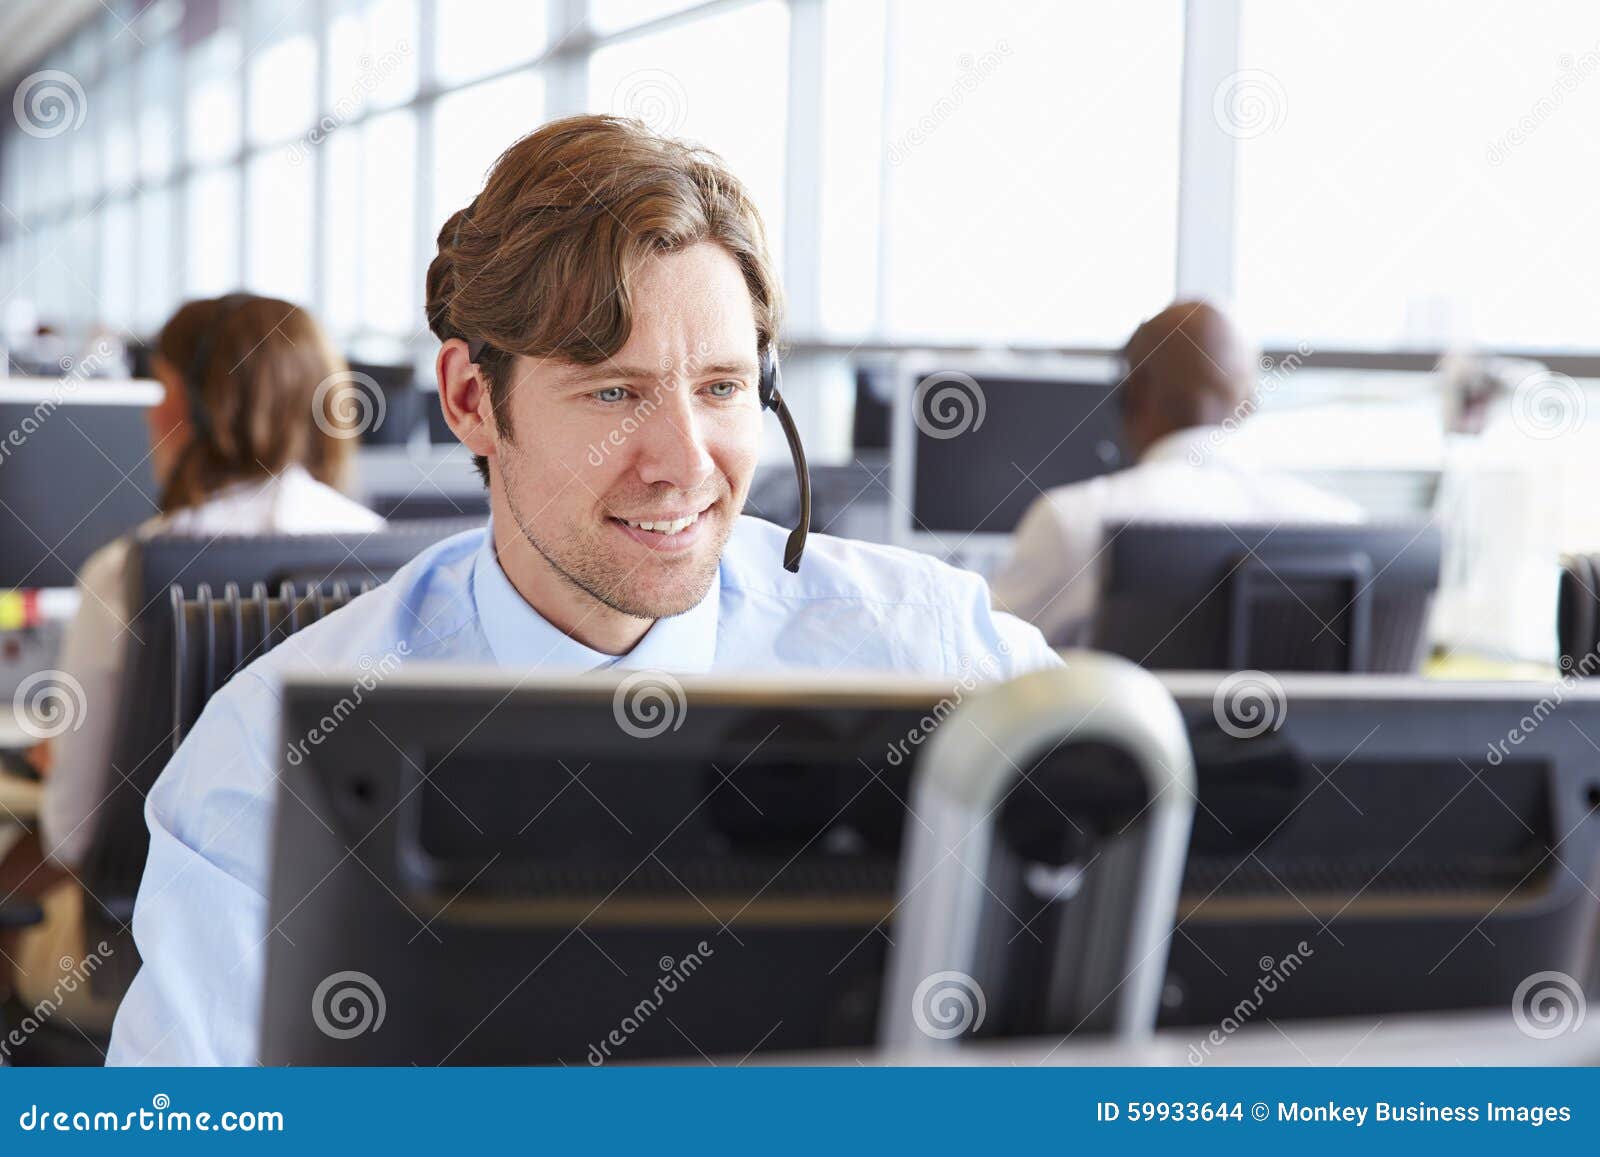 male call centre worker, looking at screen, close-up